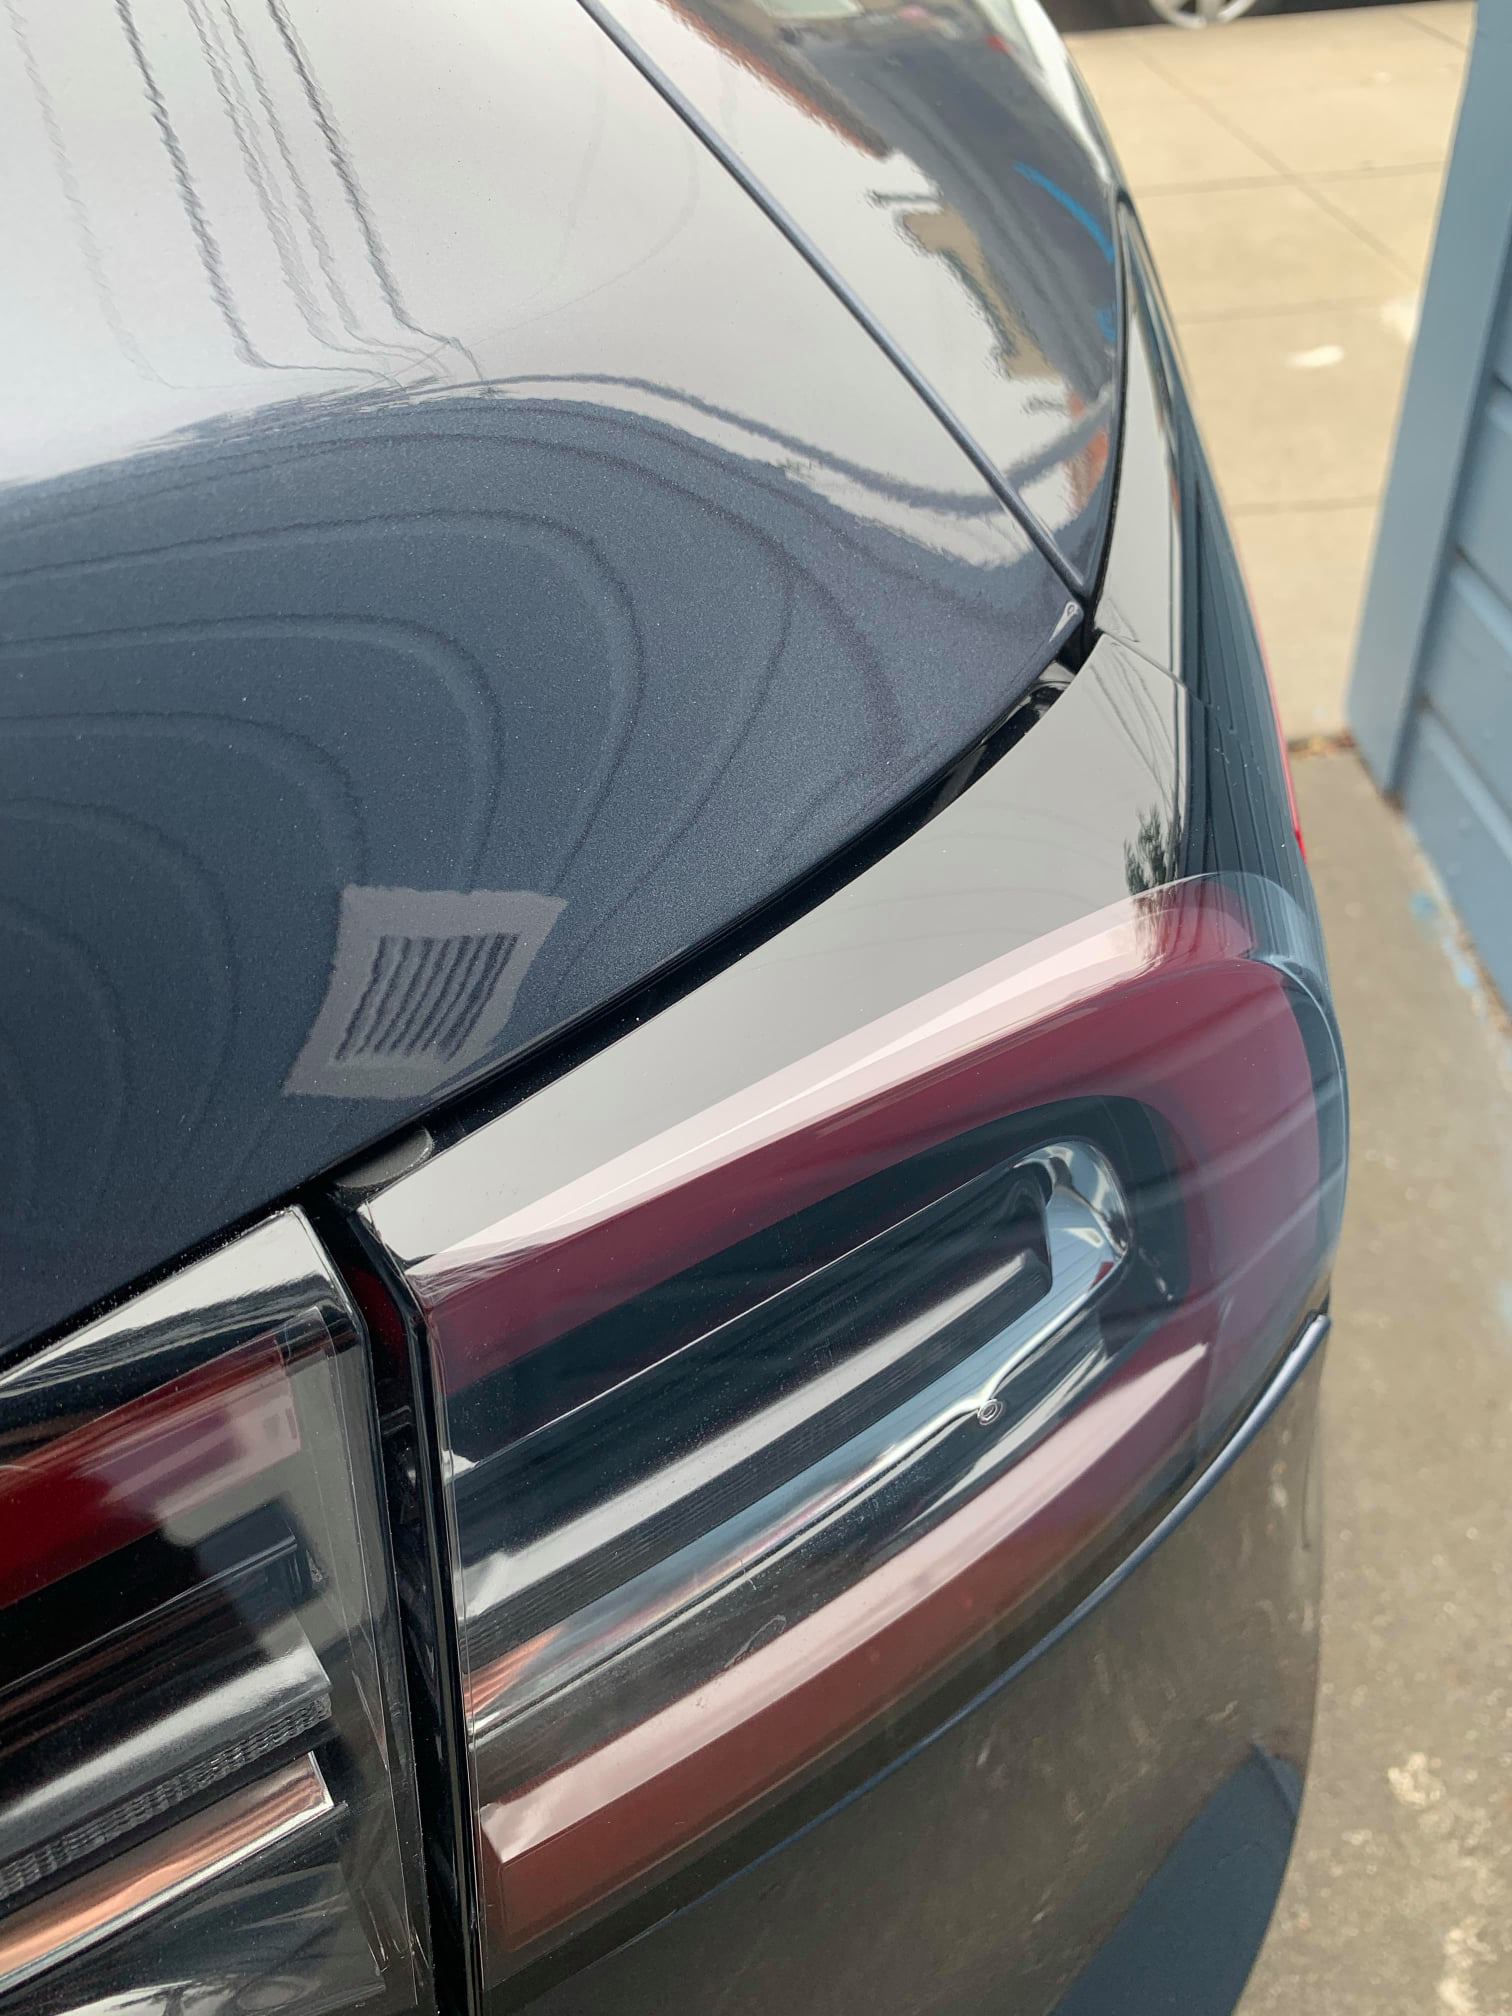 Tesla Model Y Owner Complains About Quality Issues That Will Leave You